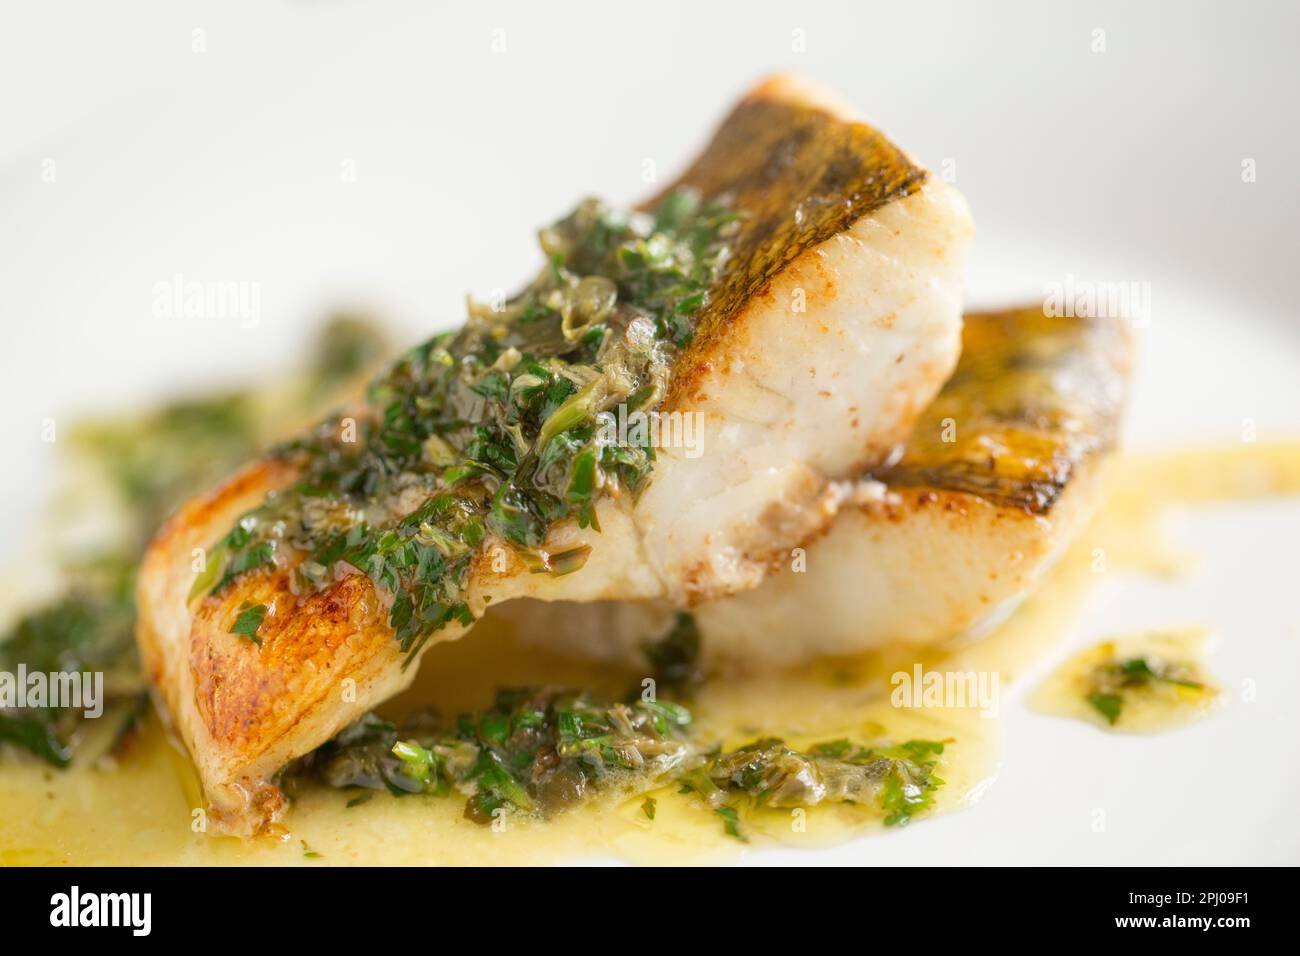 Two zander fillets that have been fried in oil and served with a caper, parsley, lemon and butter sauce. Zander were introduced into the UK in the 19t Stock Photo